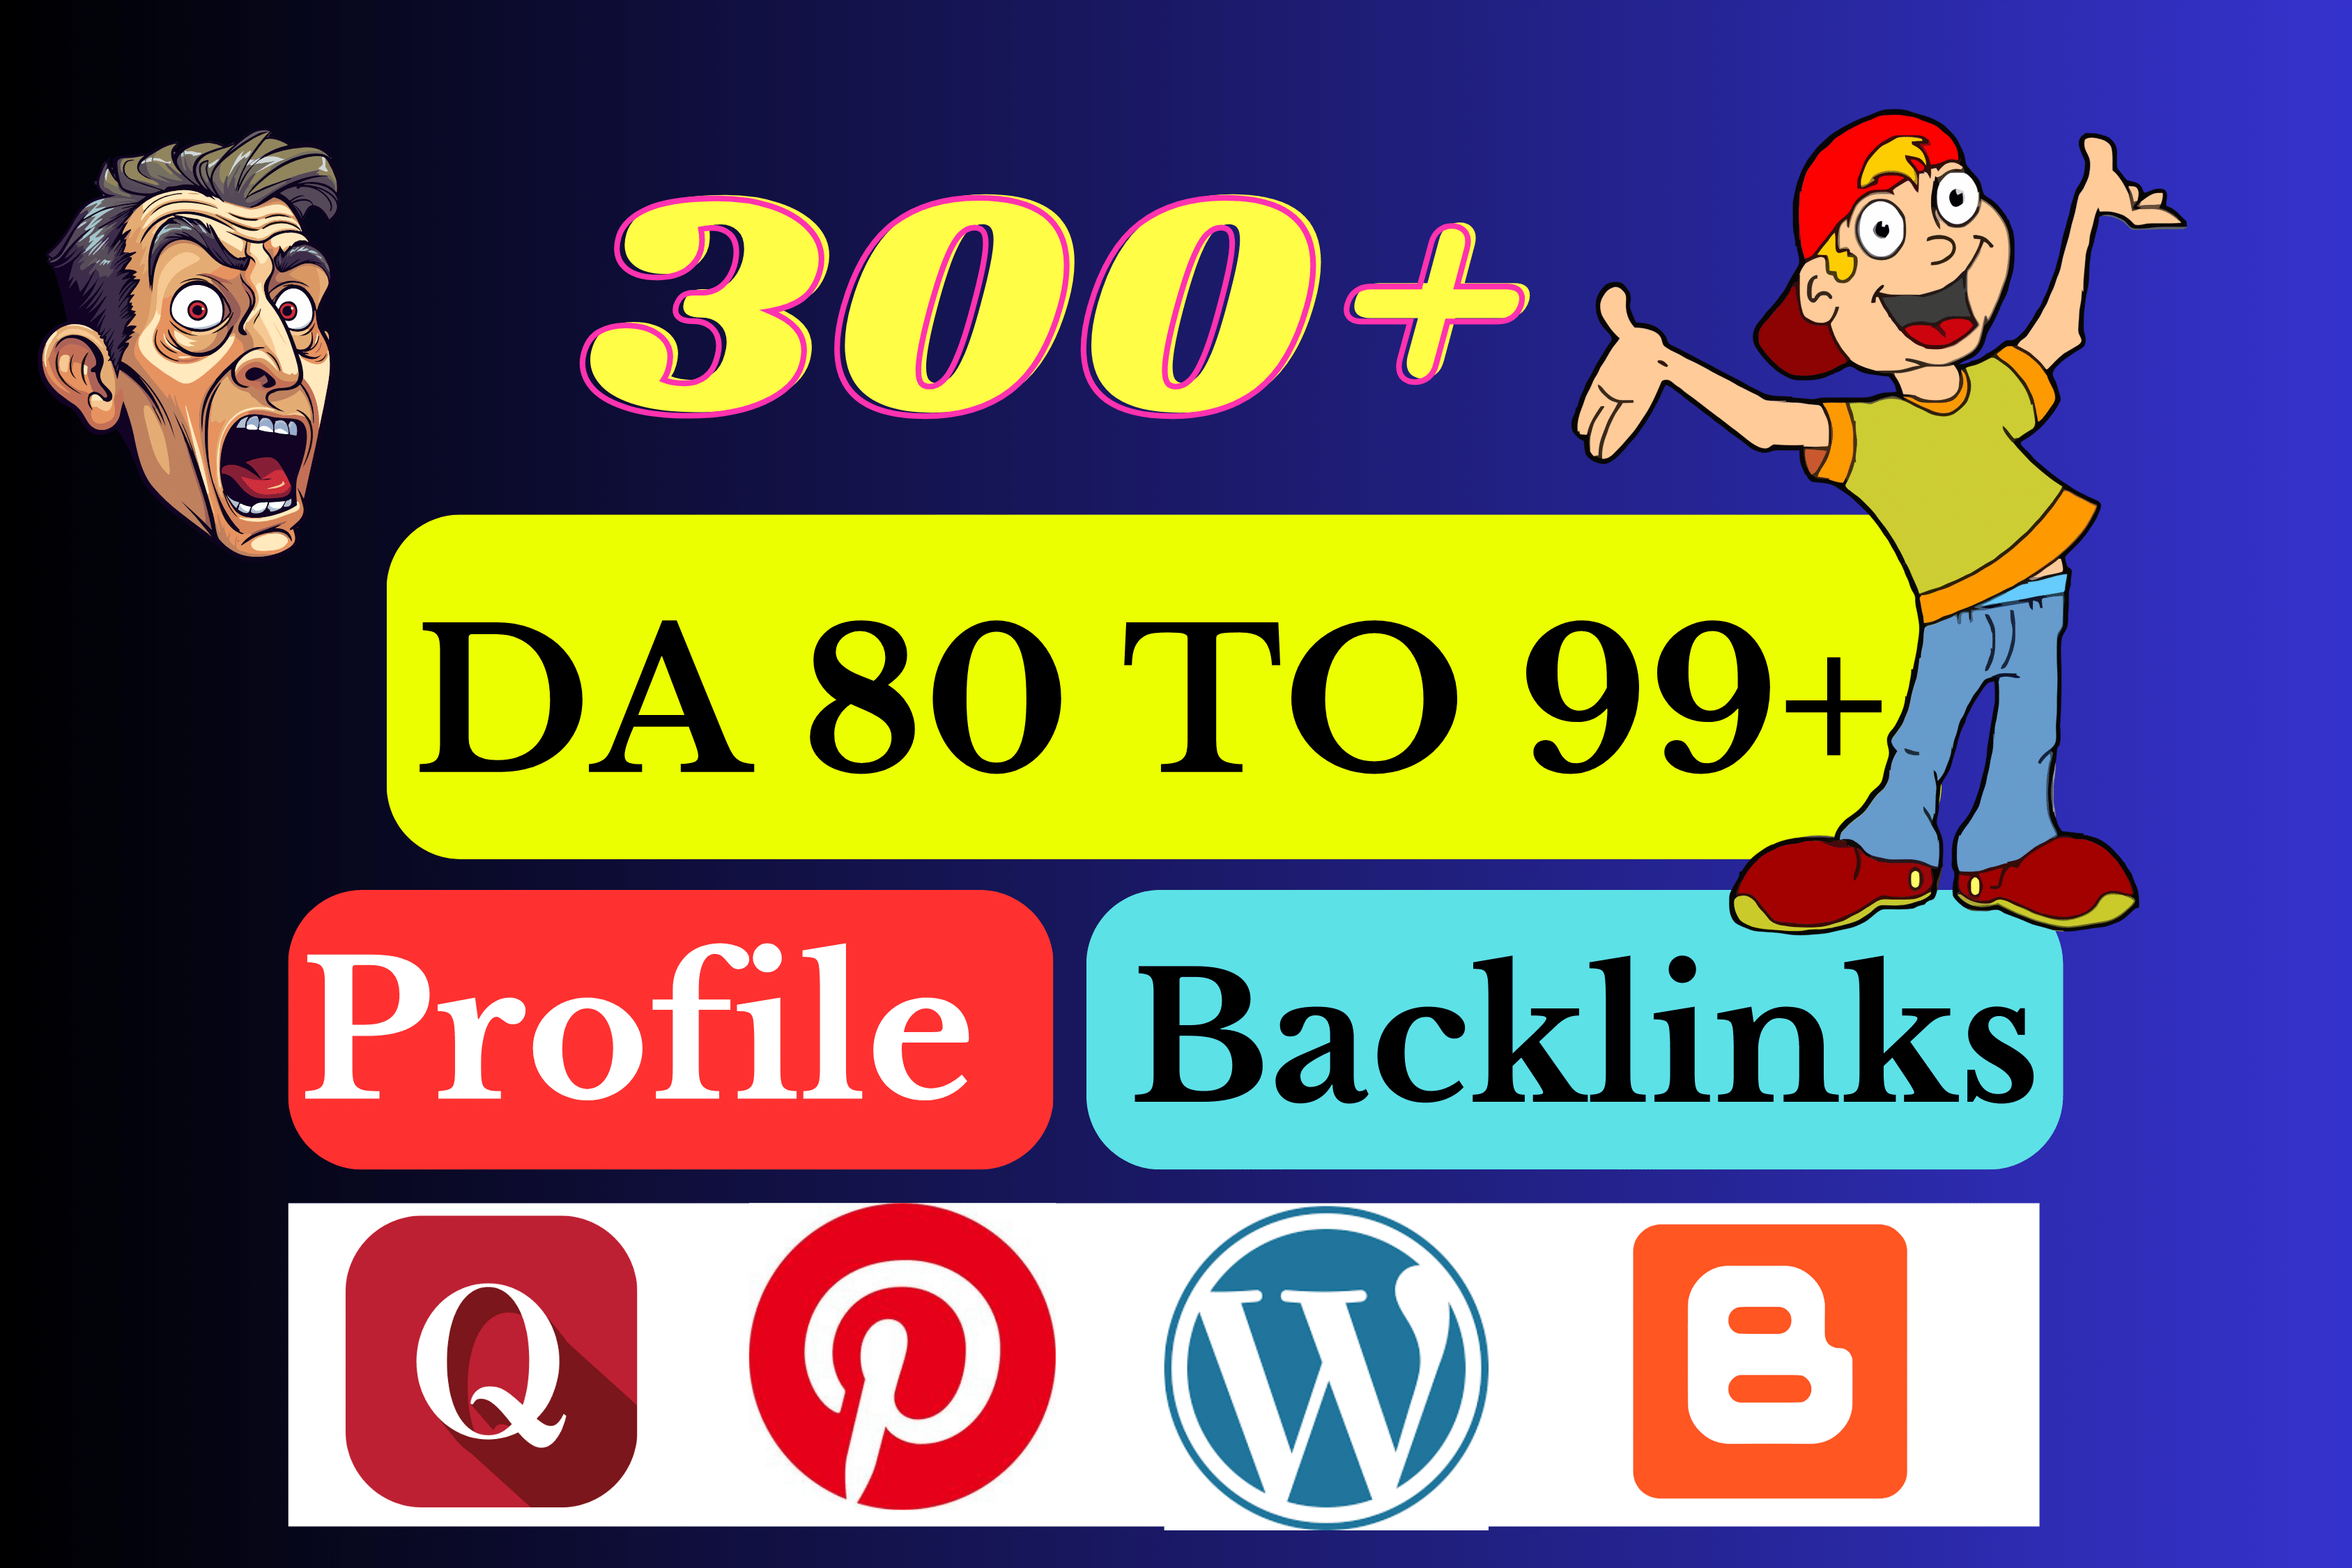 Skyrocket Your Website's Ranking with Expertly Crafted 300 Profile Backlinks - SEO Magic!